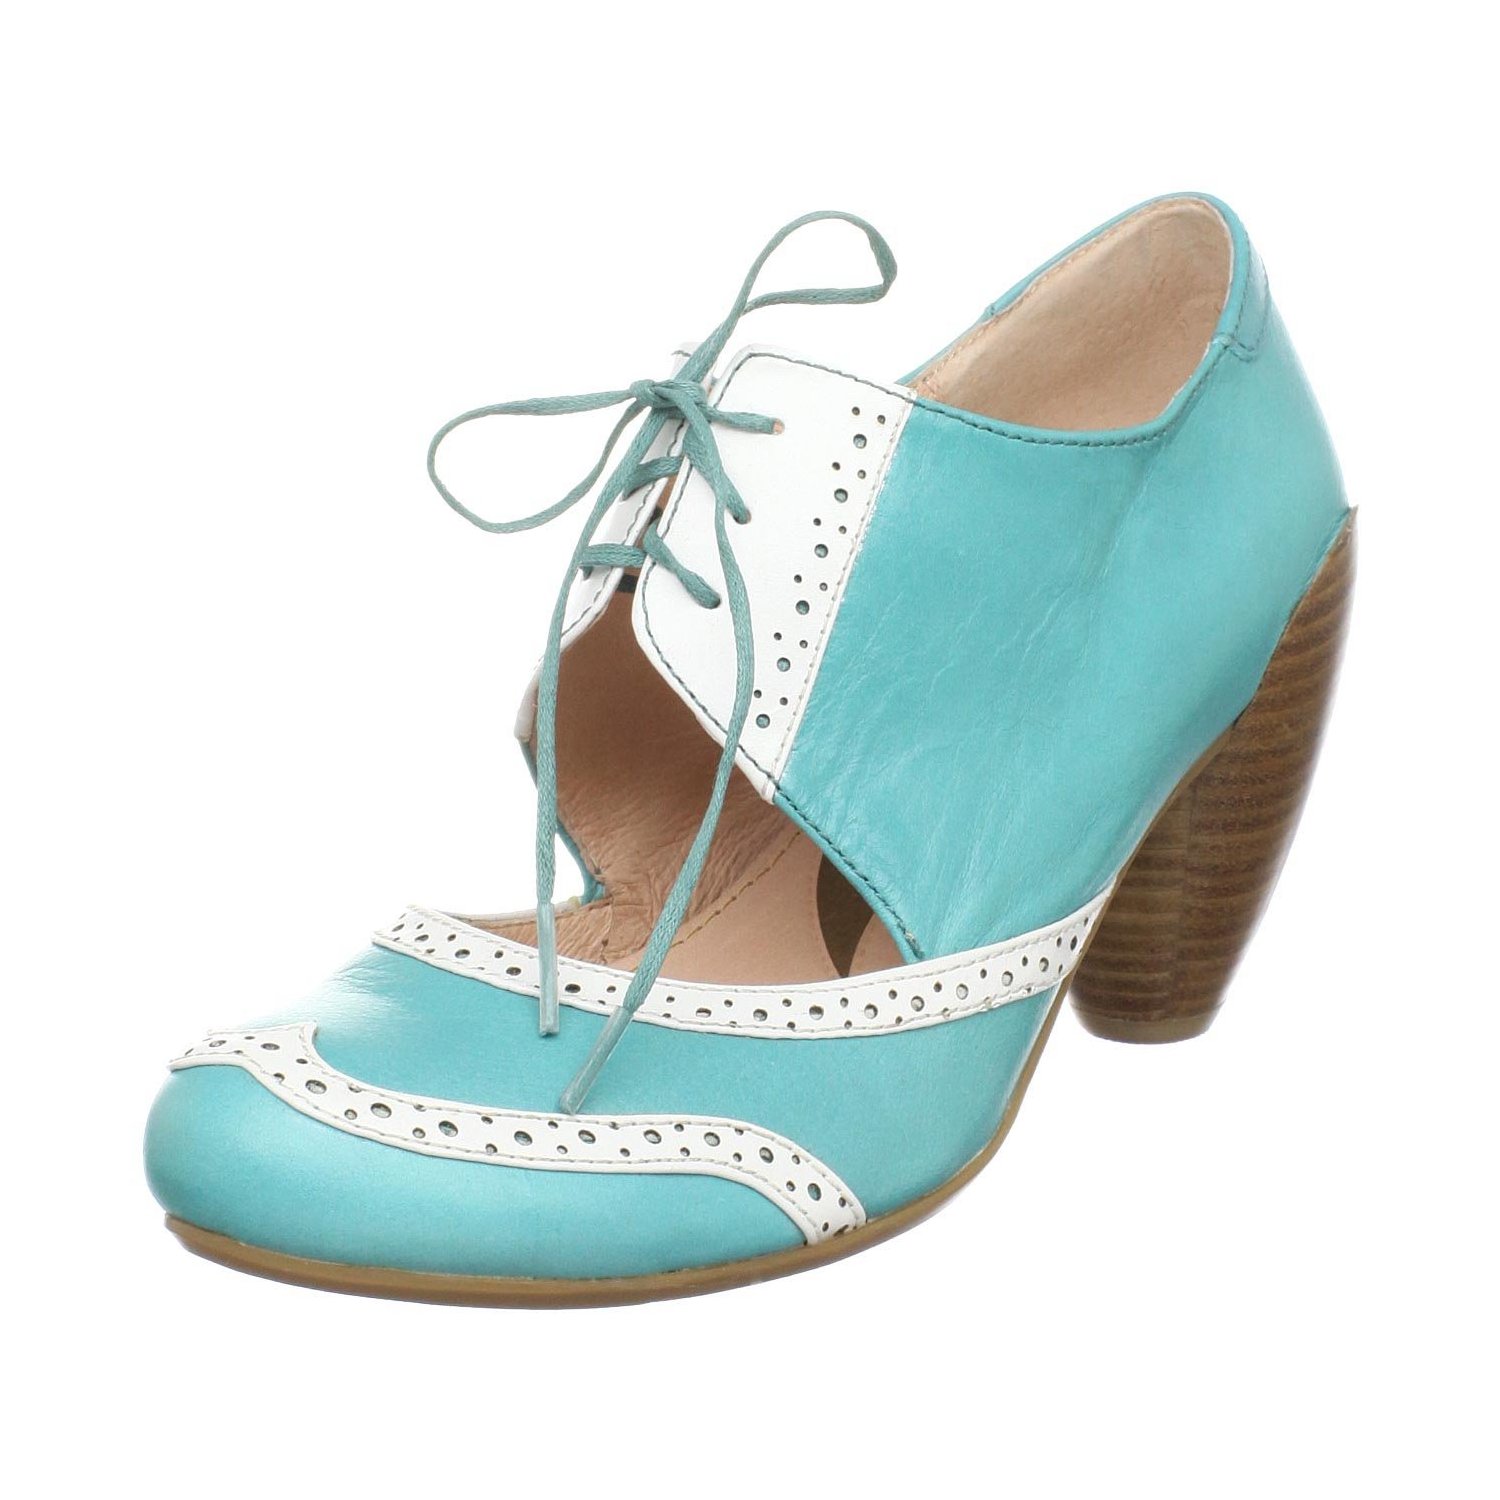 Meg The Grand: My Quest for the Perfect Shoe: Green and Blue